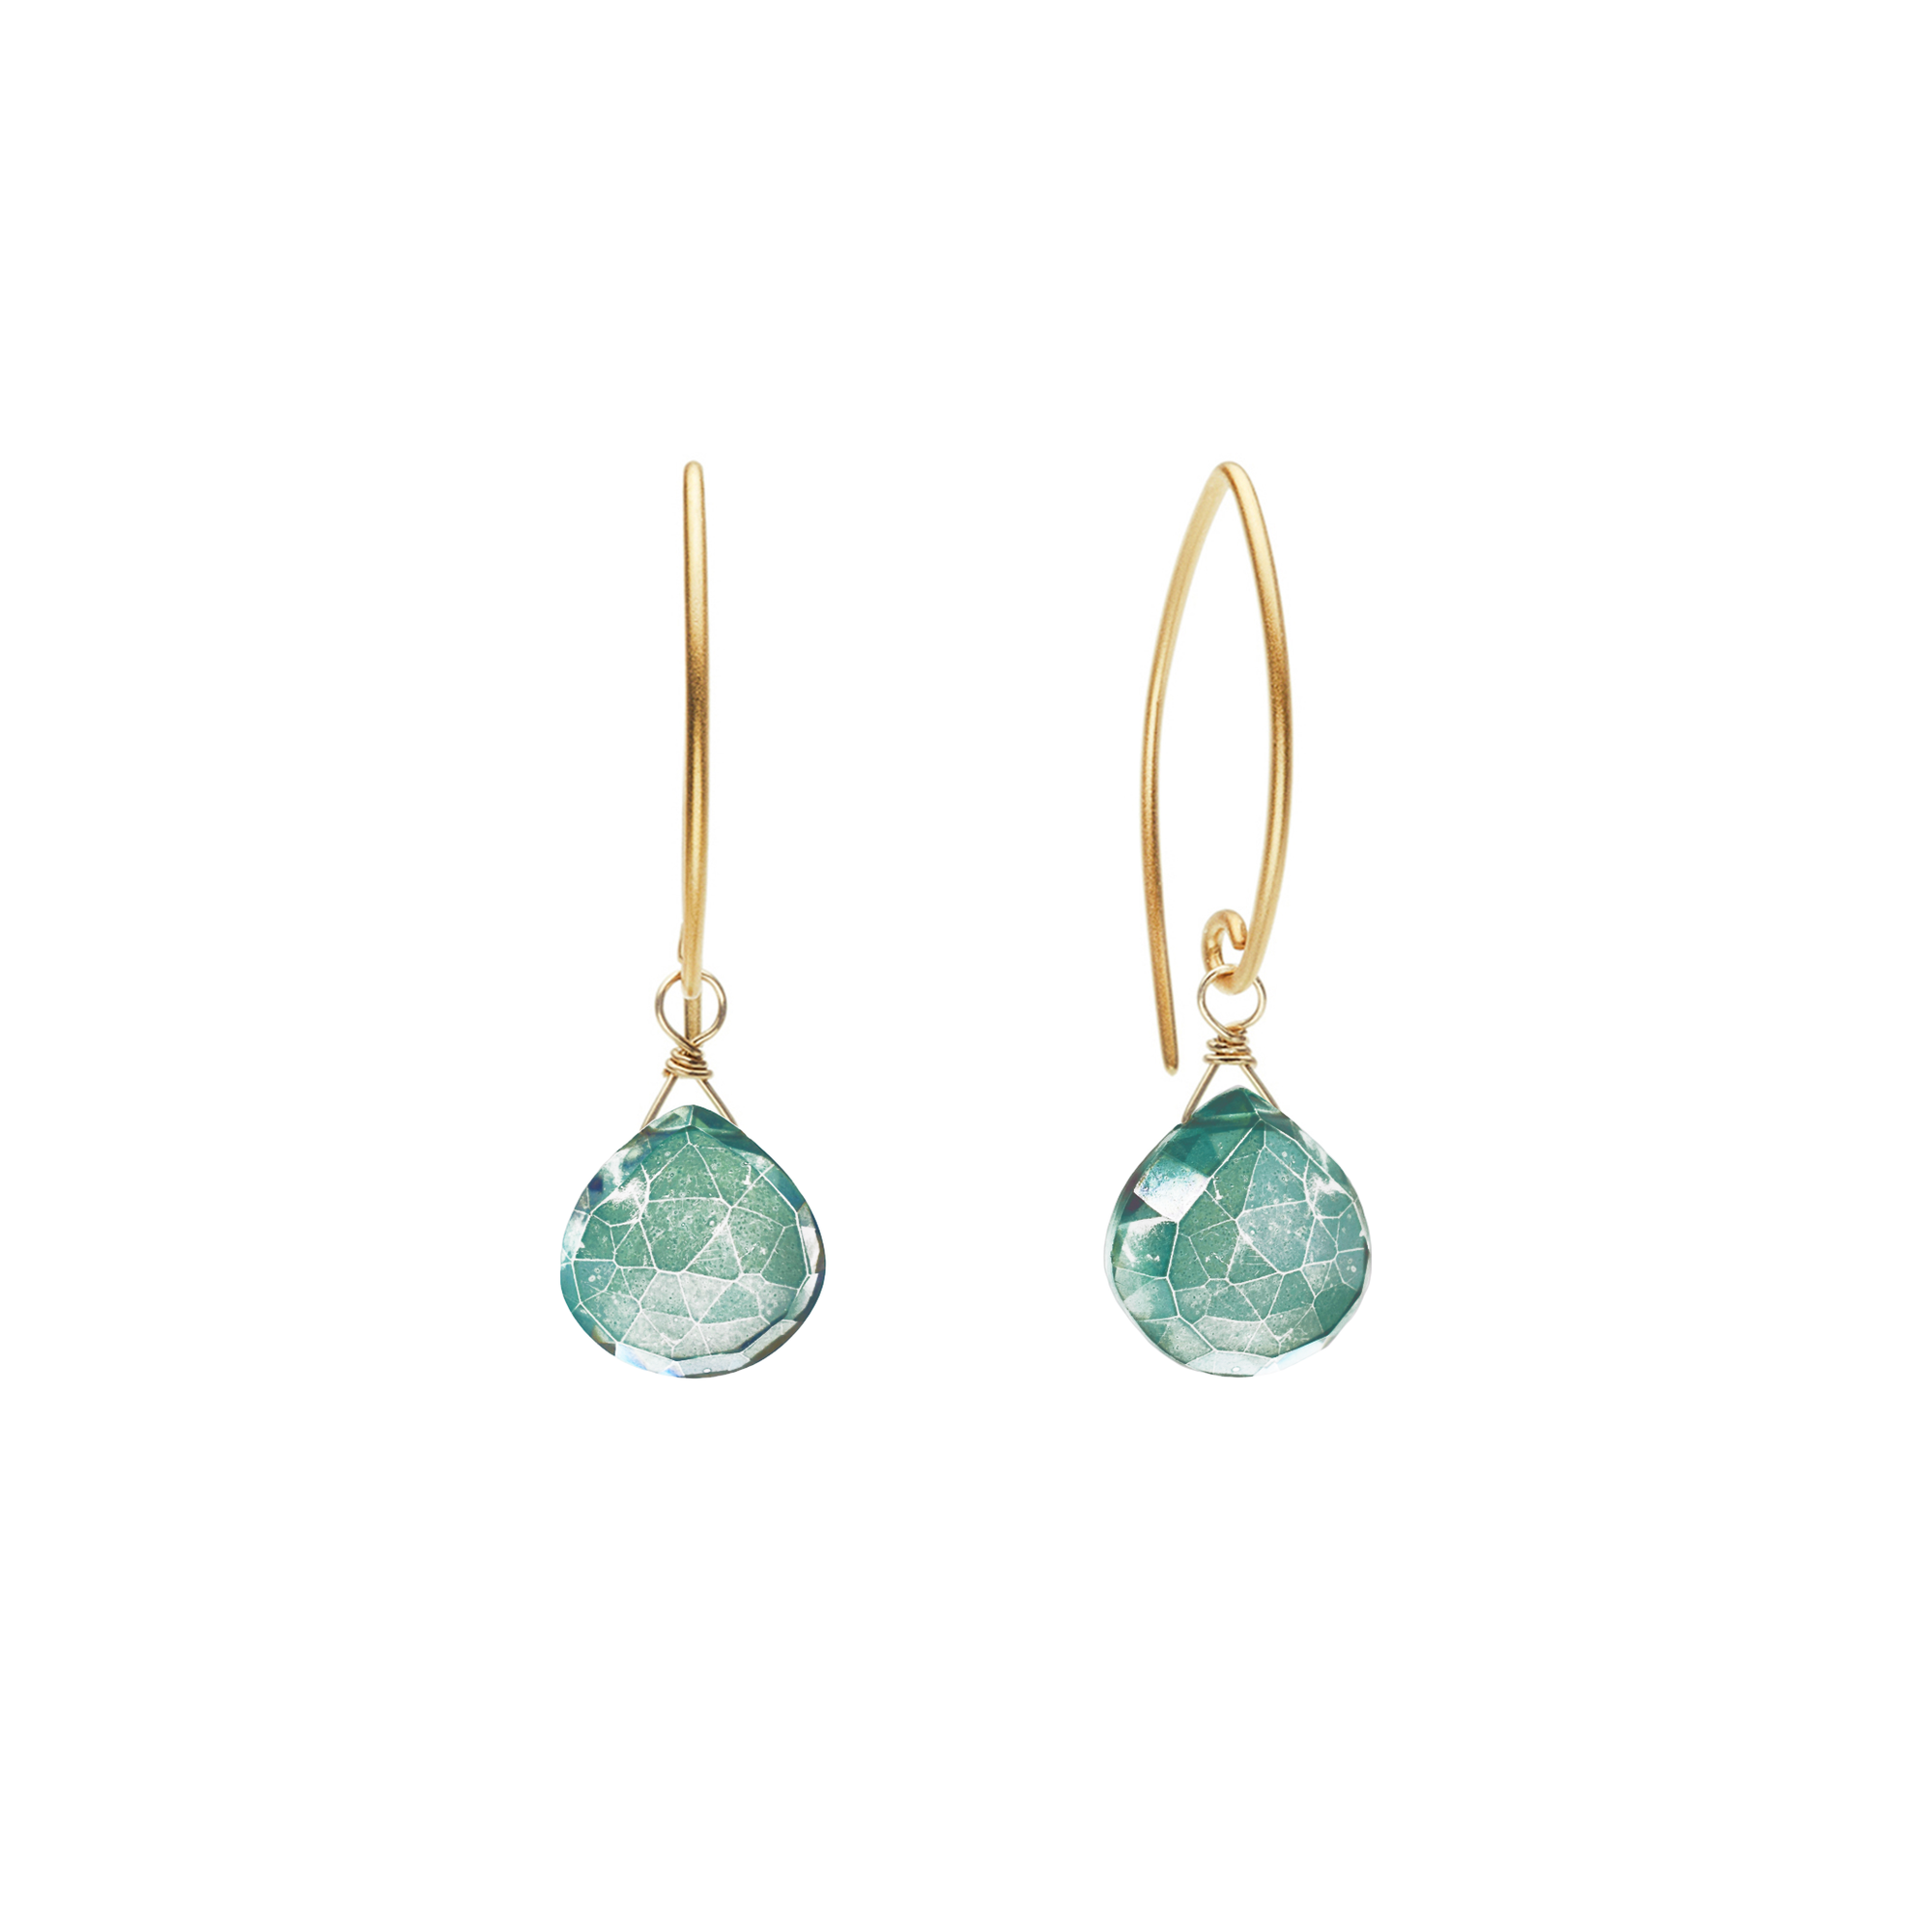 Image of gold dangle earrings with green mystic quartz gemstone on white background